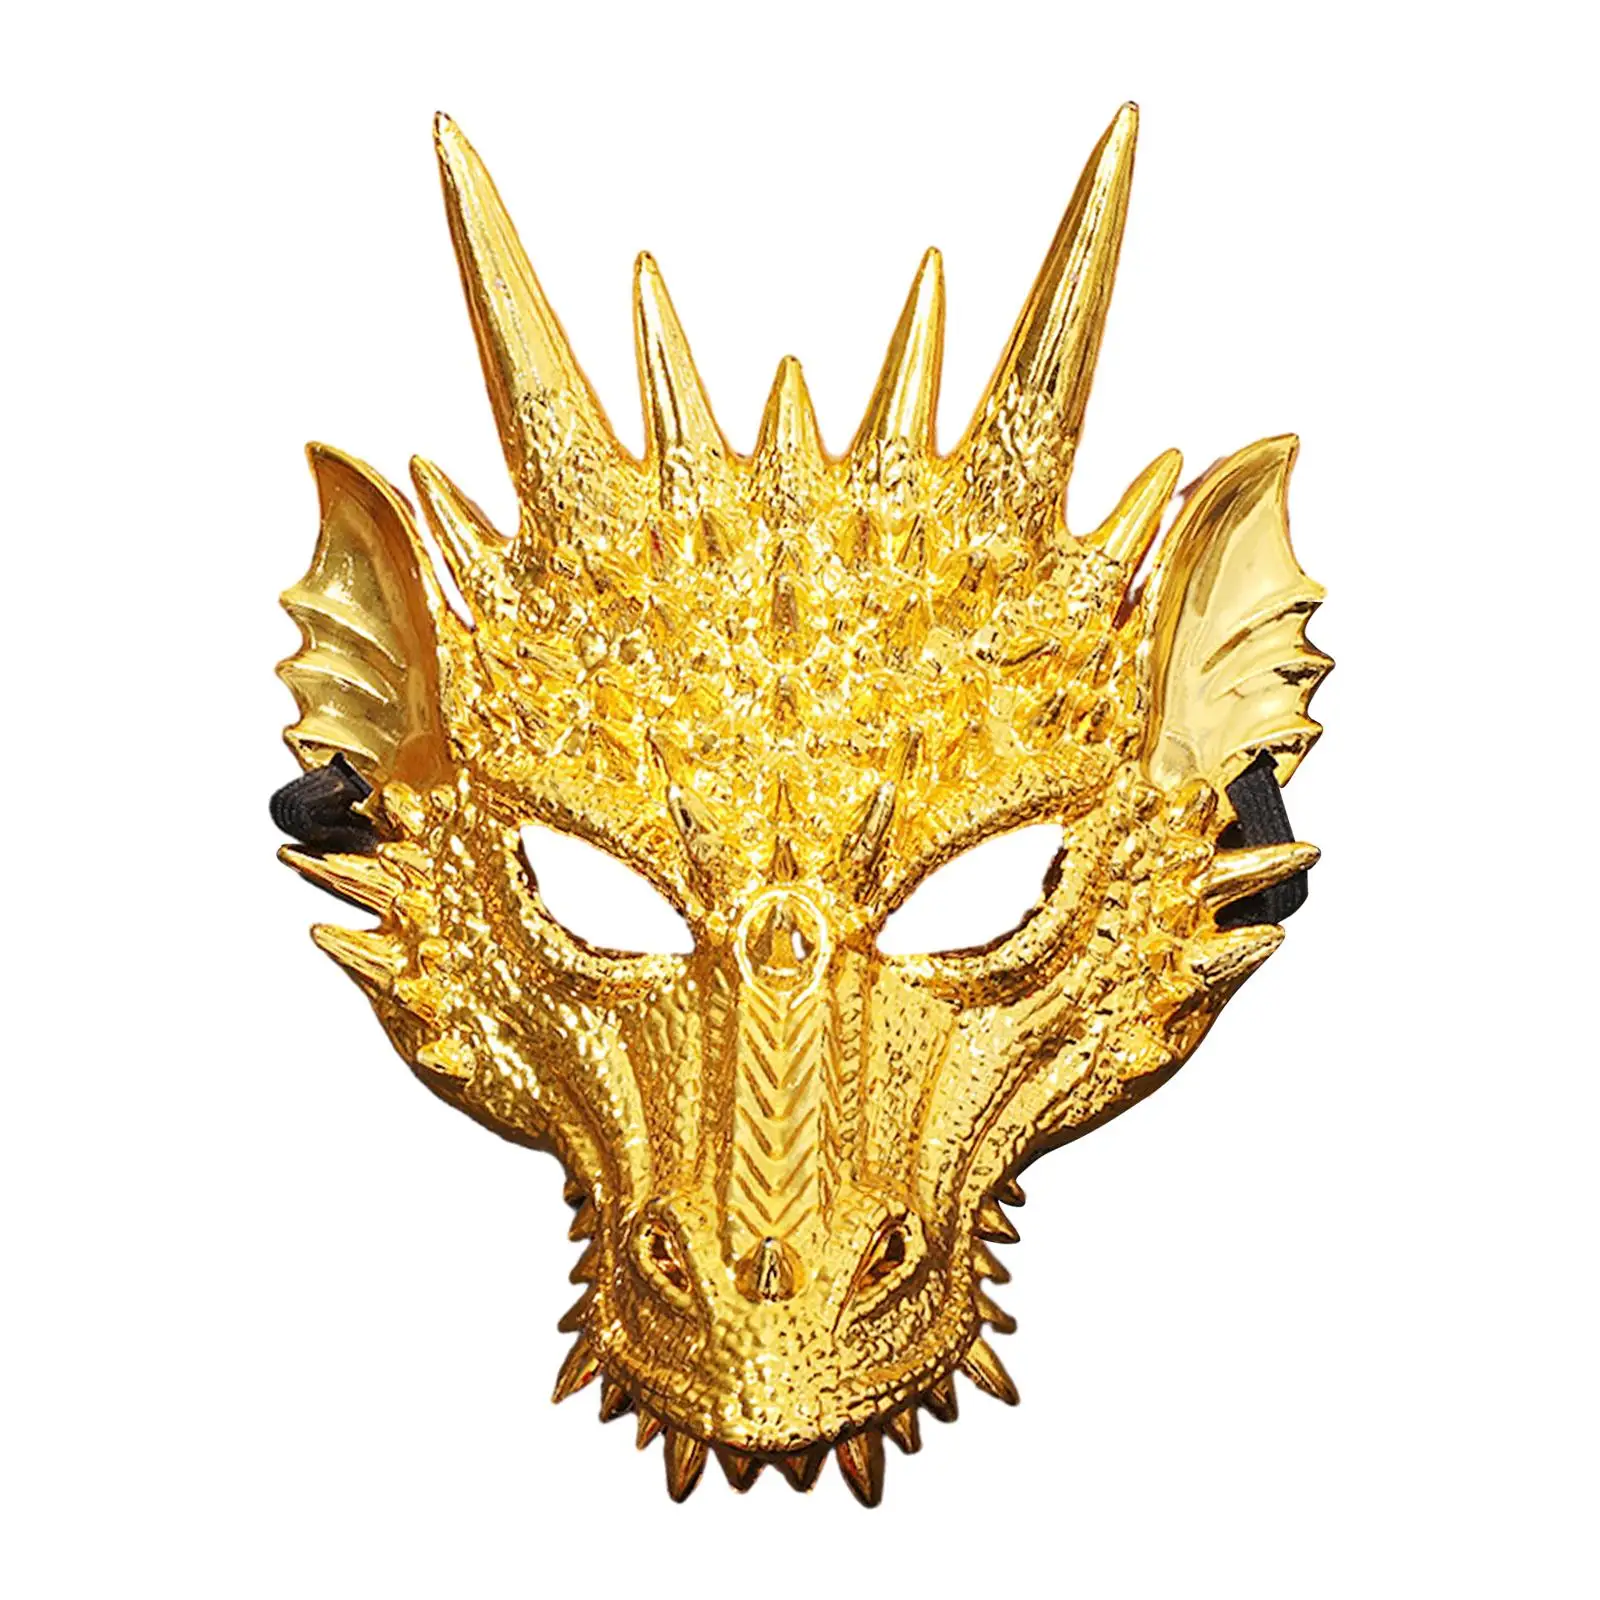 Dragon Mask Halloween Costume Full Face Mask for Nightclub Festival Party